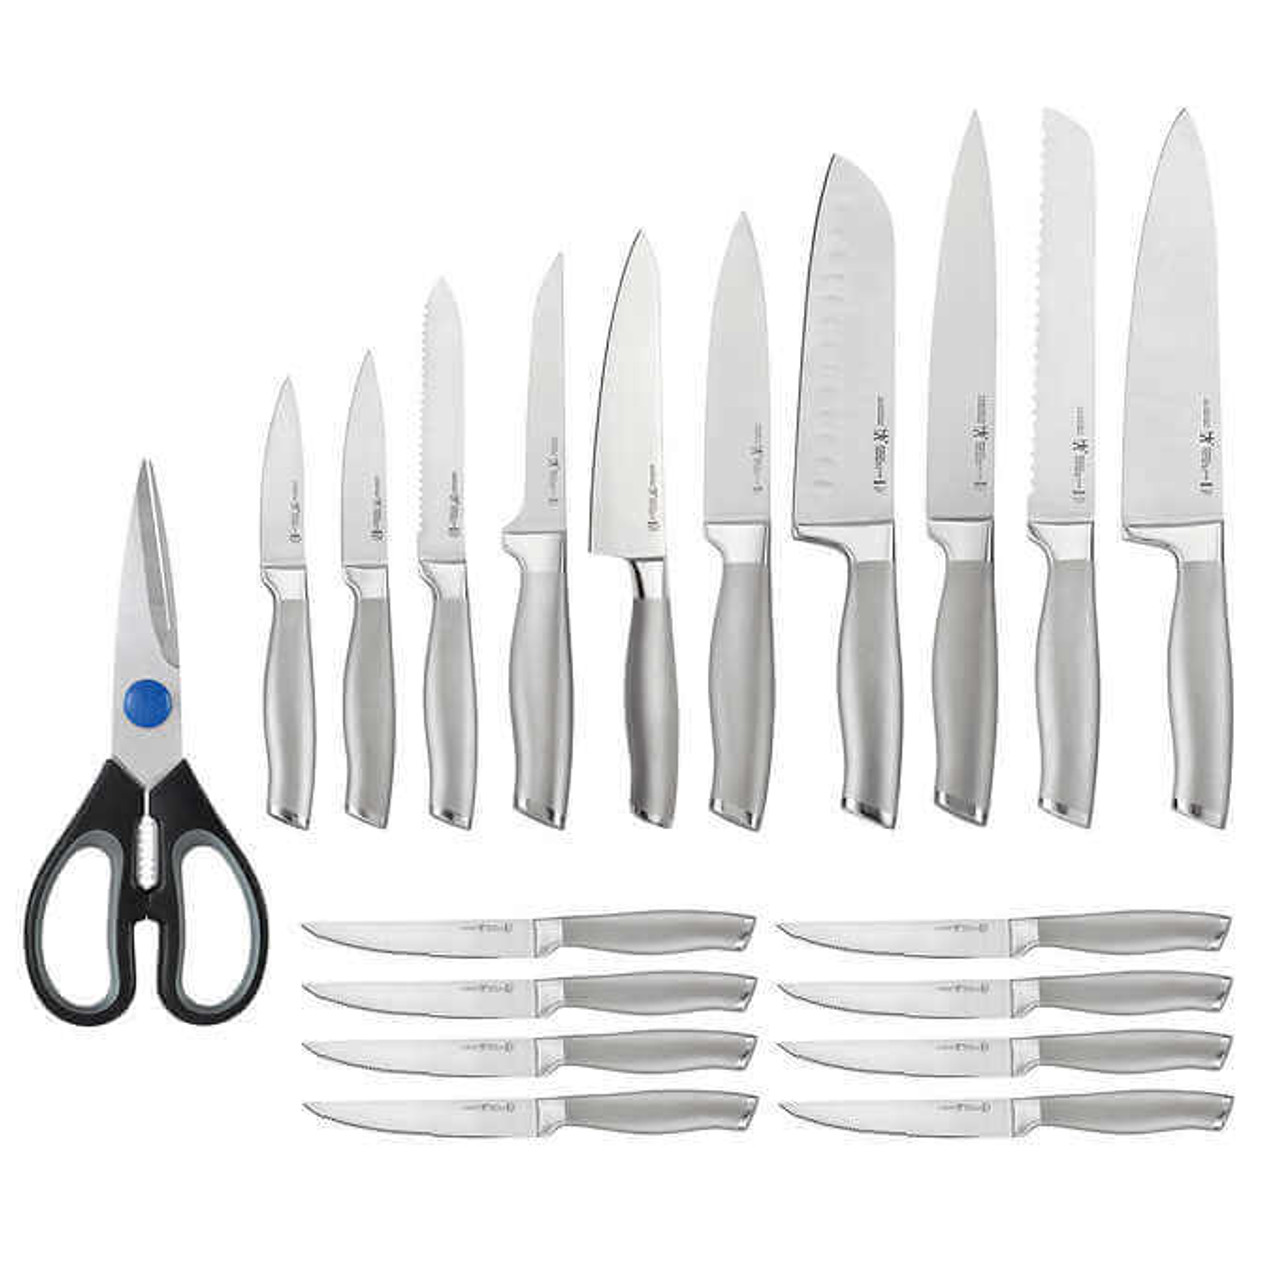 Henckels Statement 20-pc Self-Sharpening Knife Set with Block - Stainless